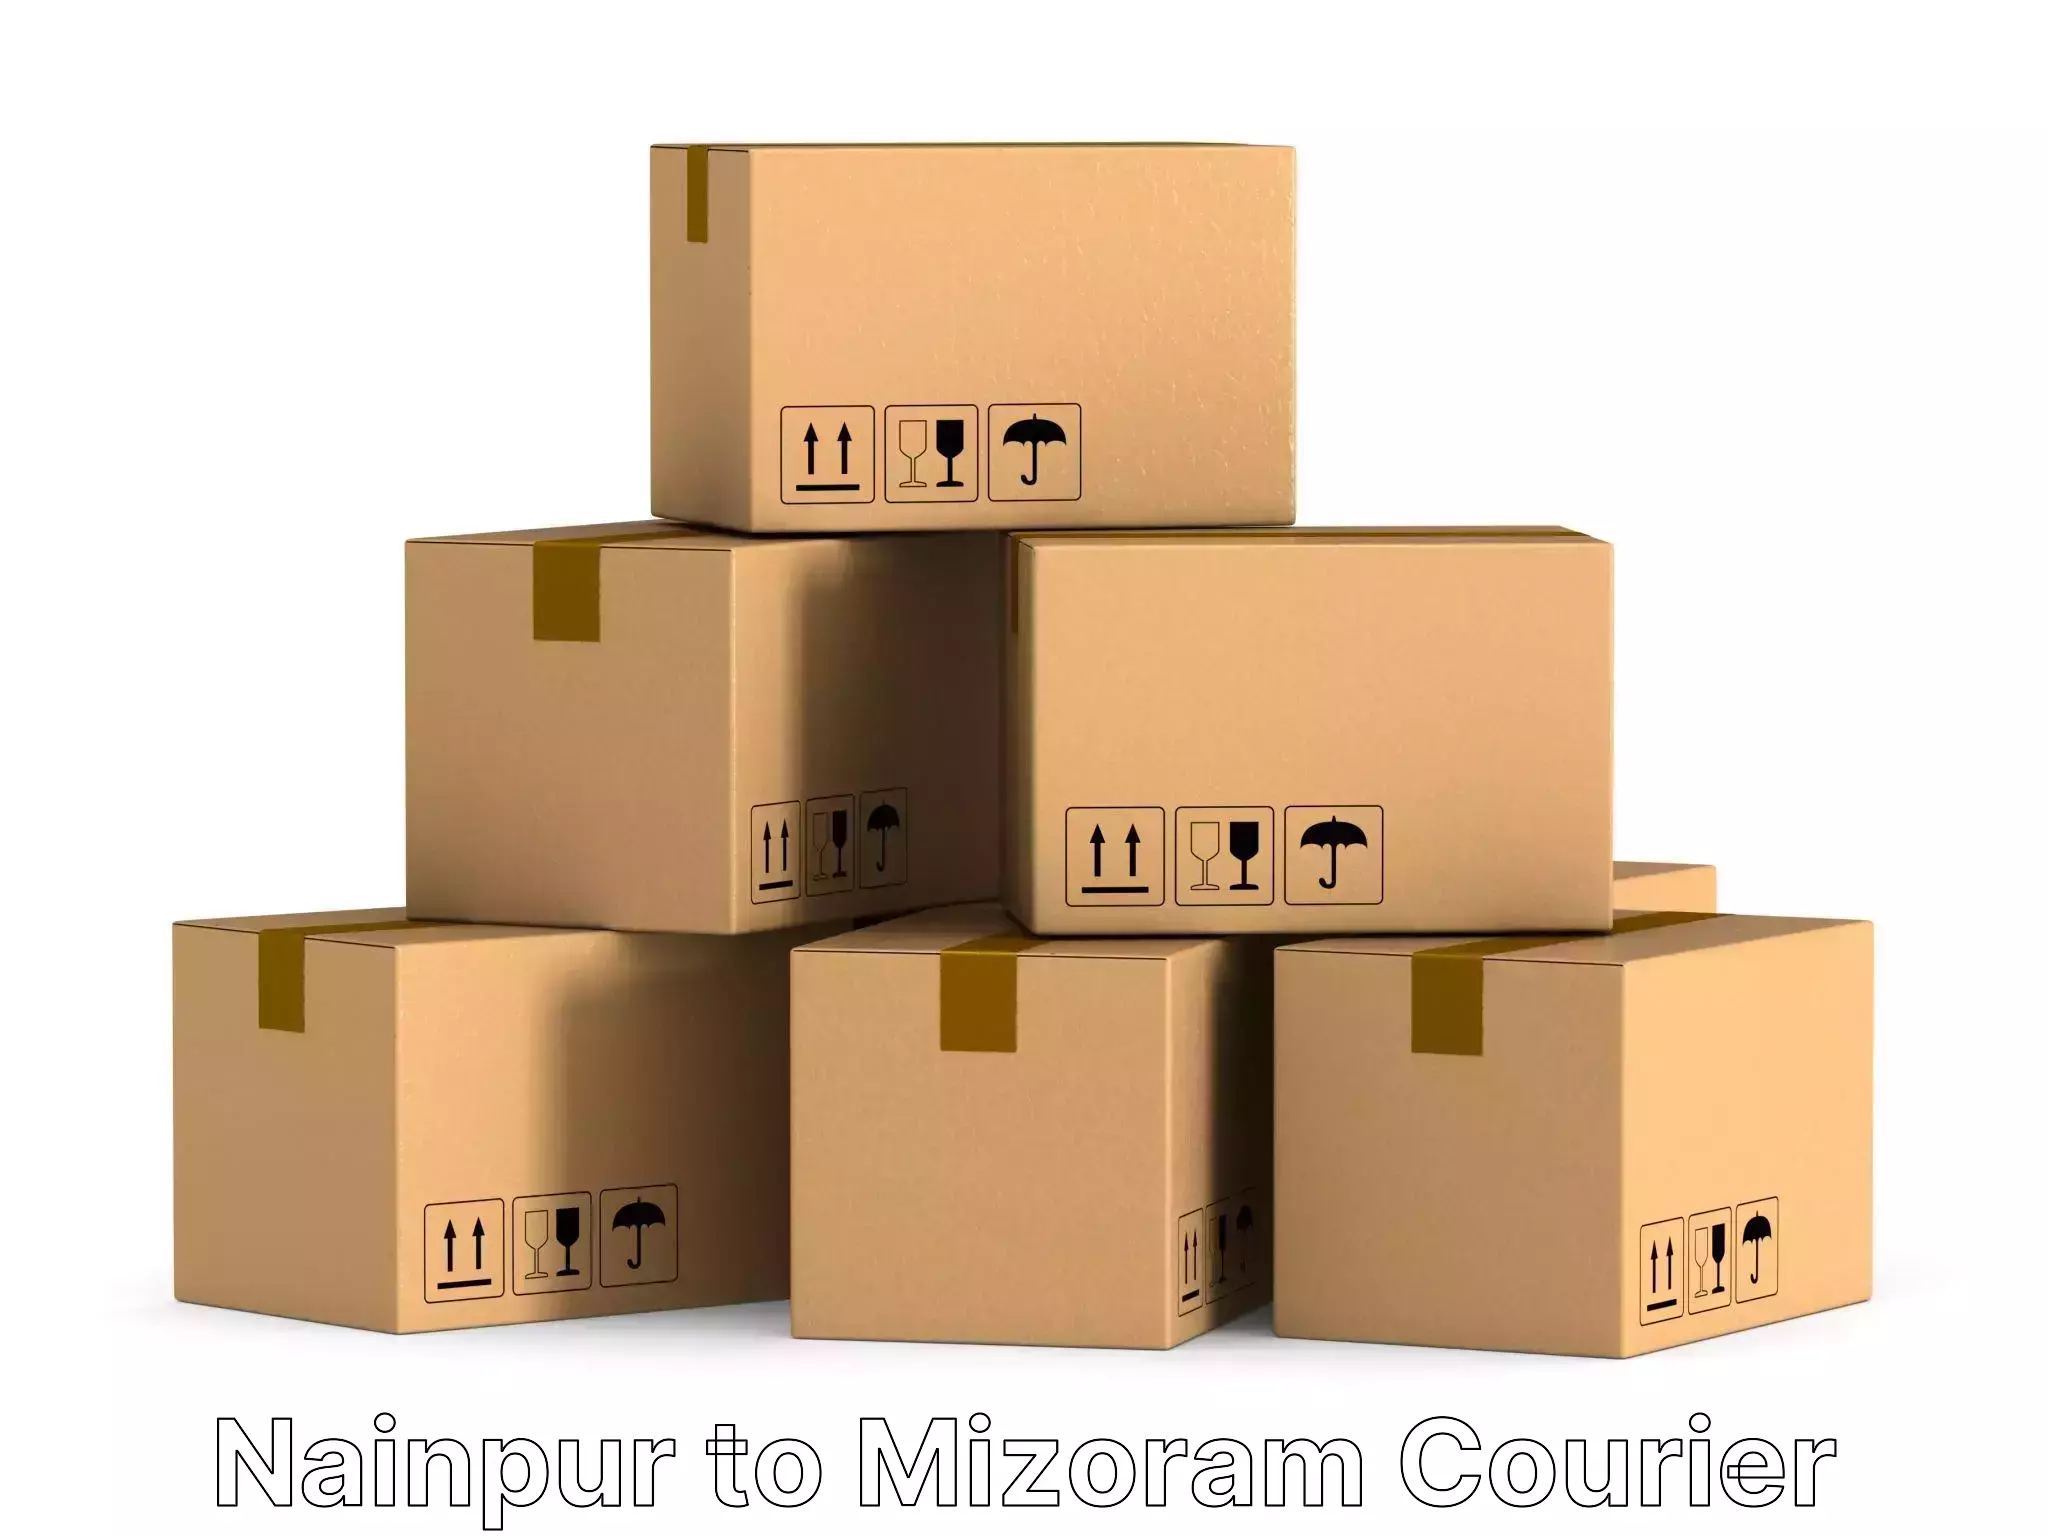 Hassle-free relocation in Nainpur to Mizoram